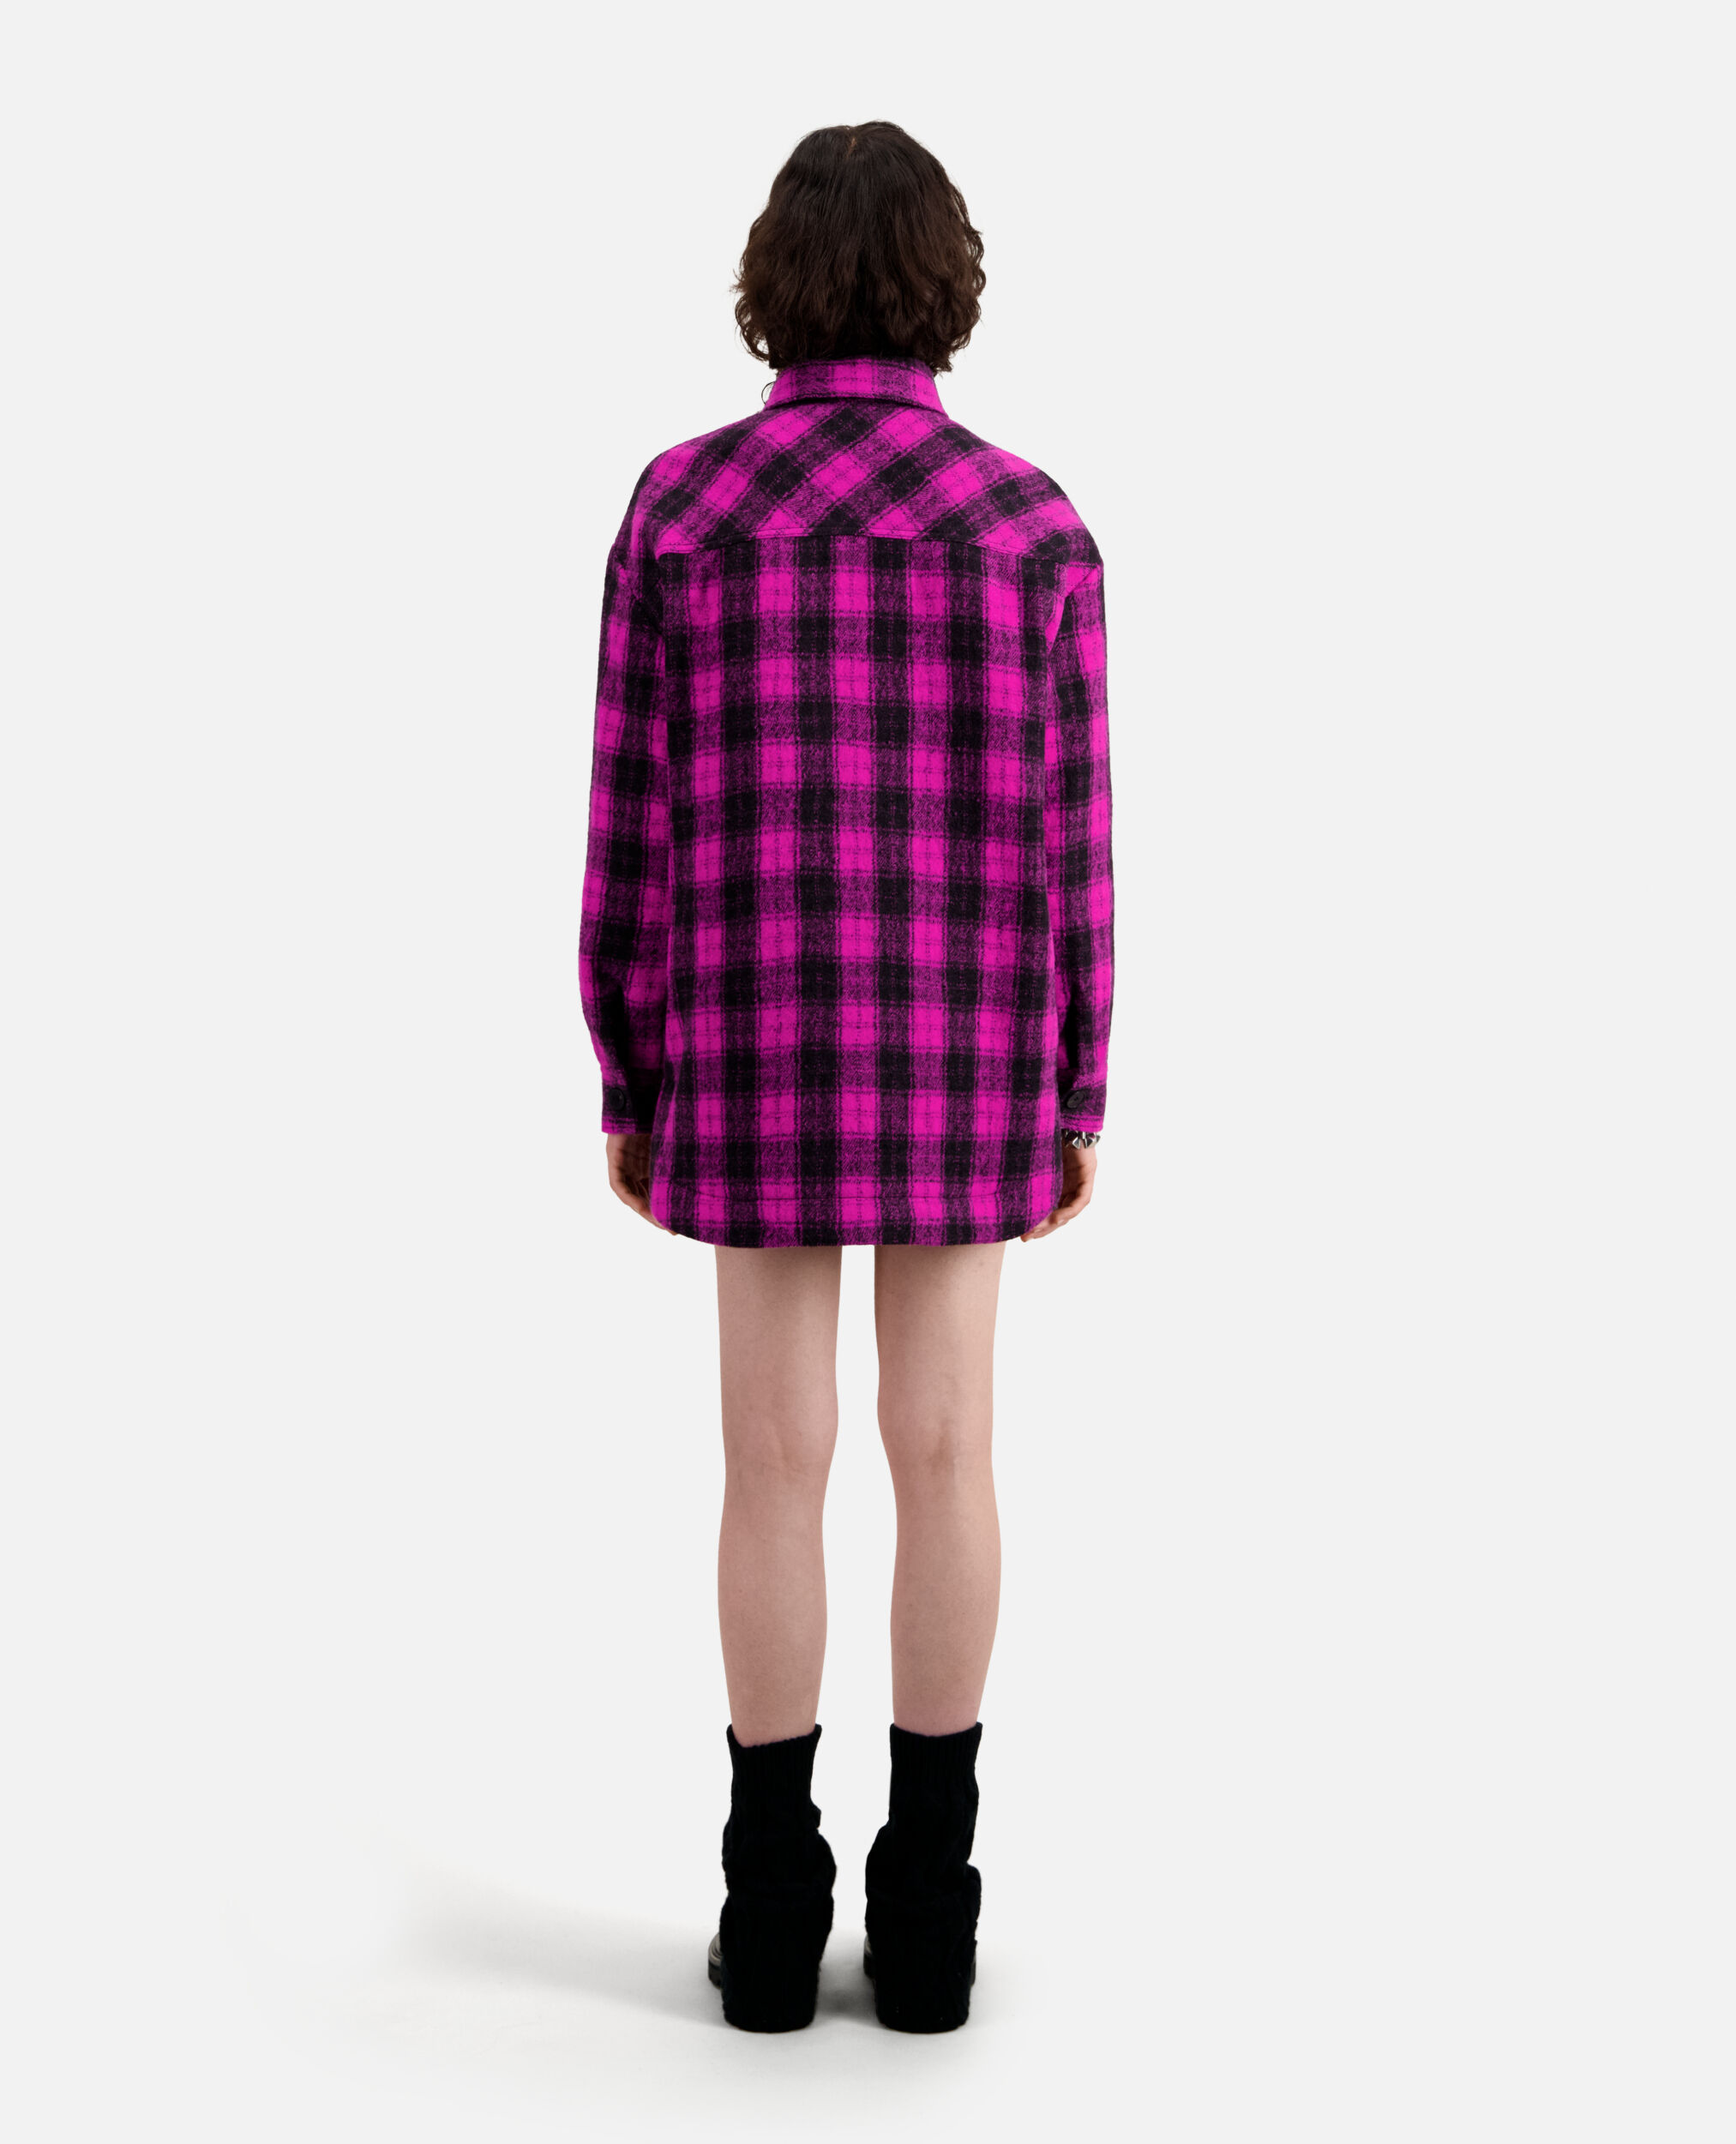 Overshirt style jacket with pink checks, PINK BLACK, hi-res image number null